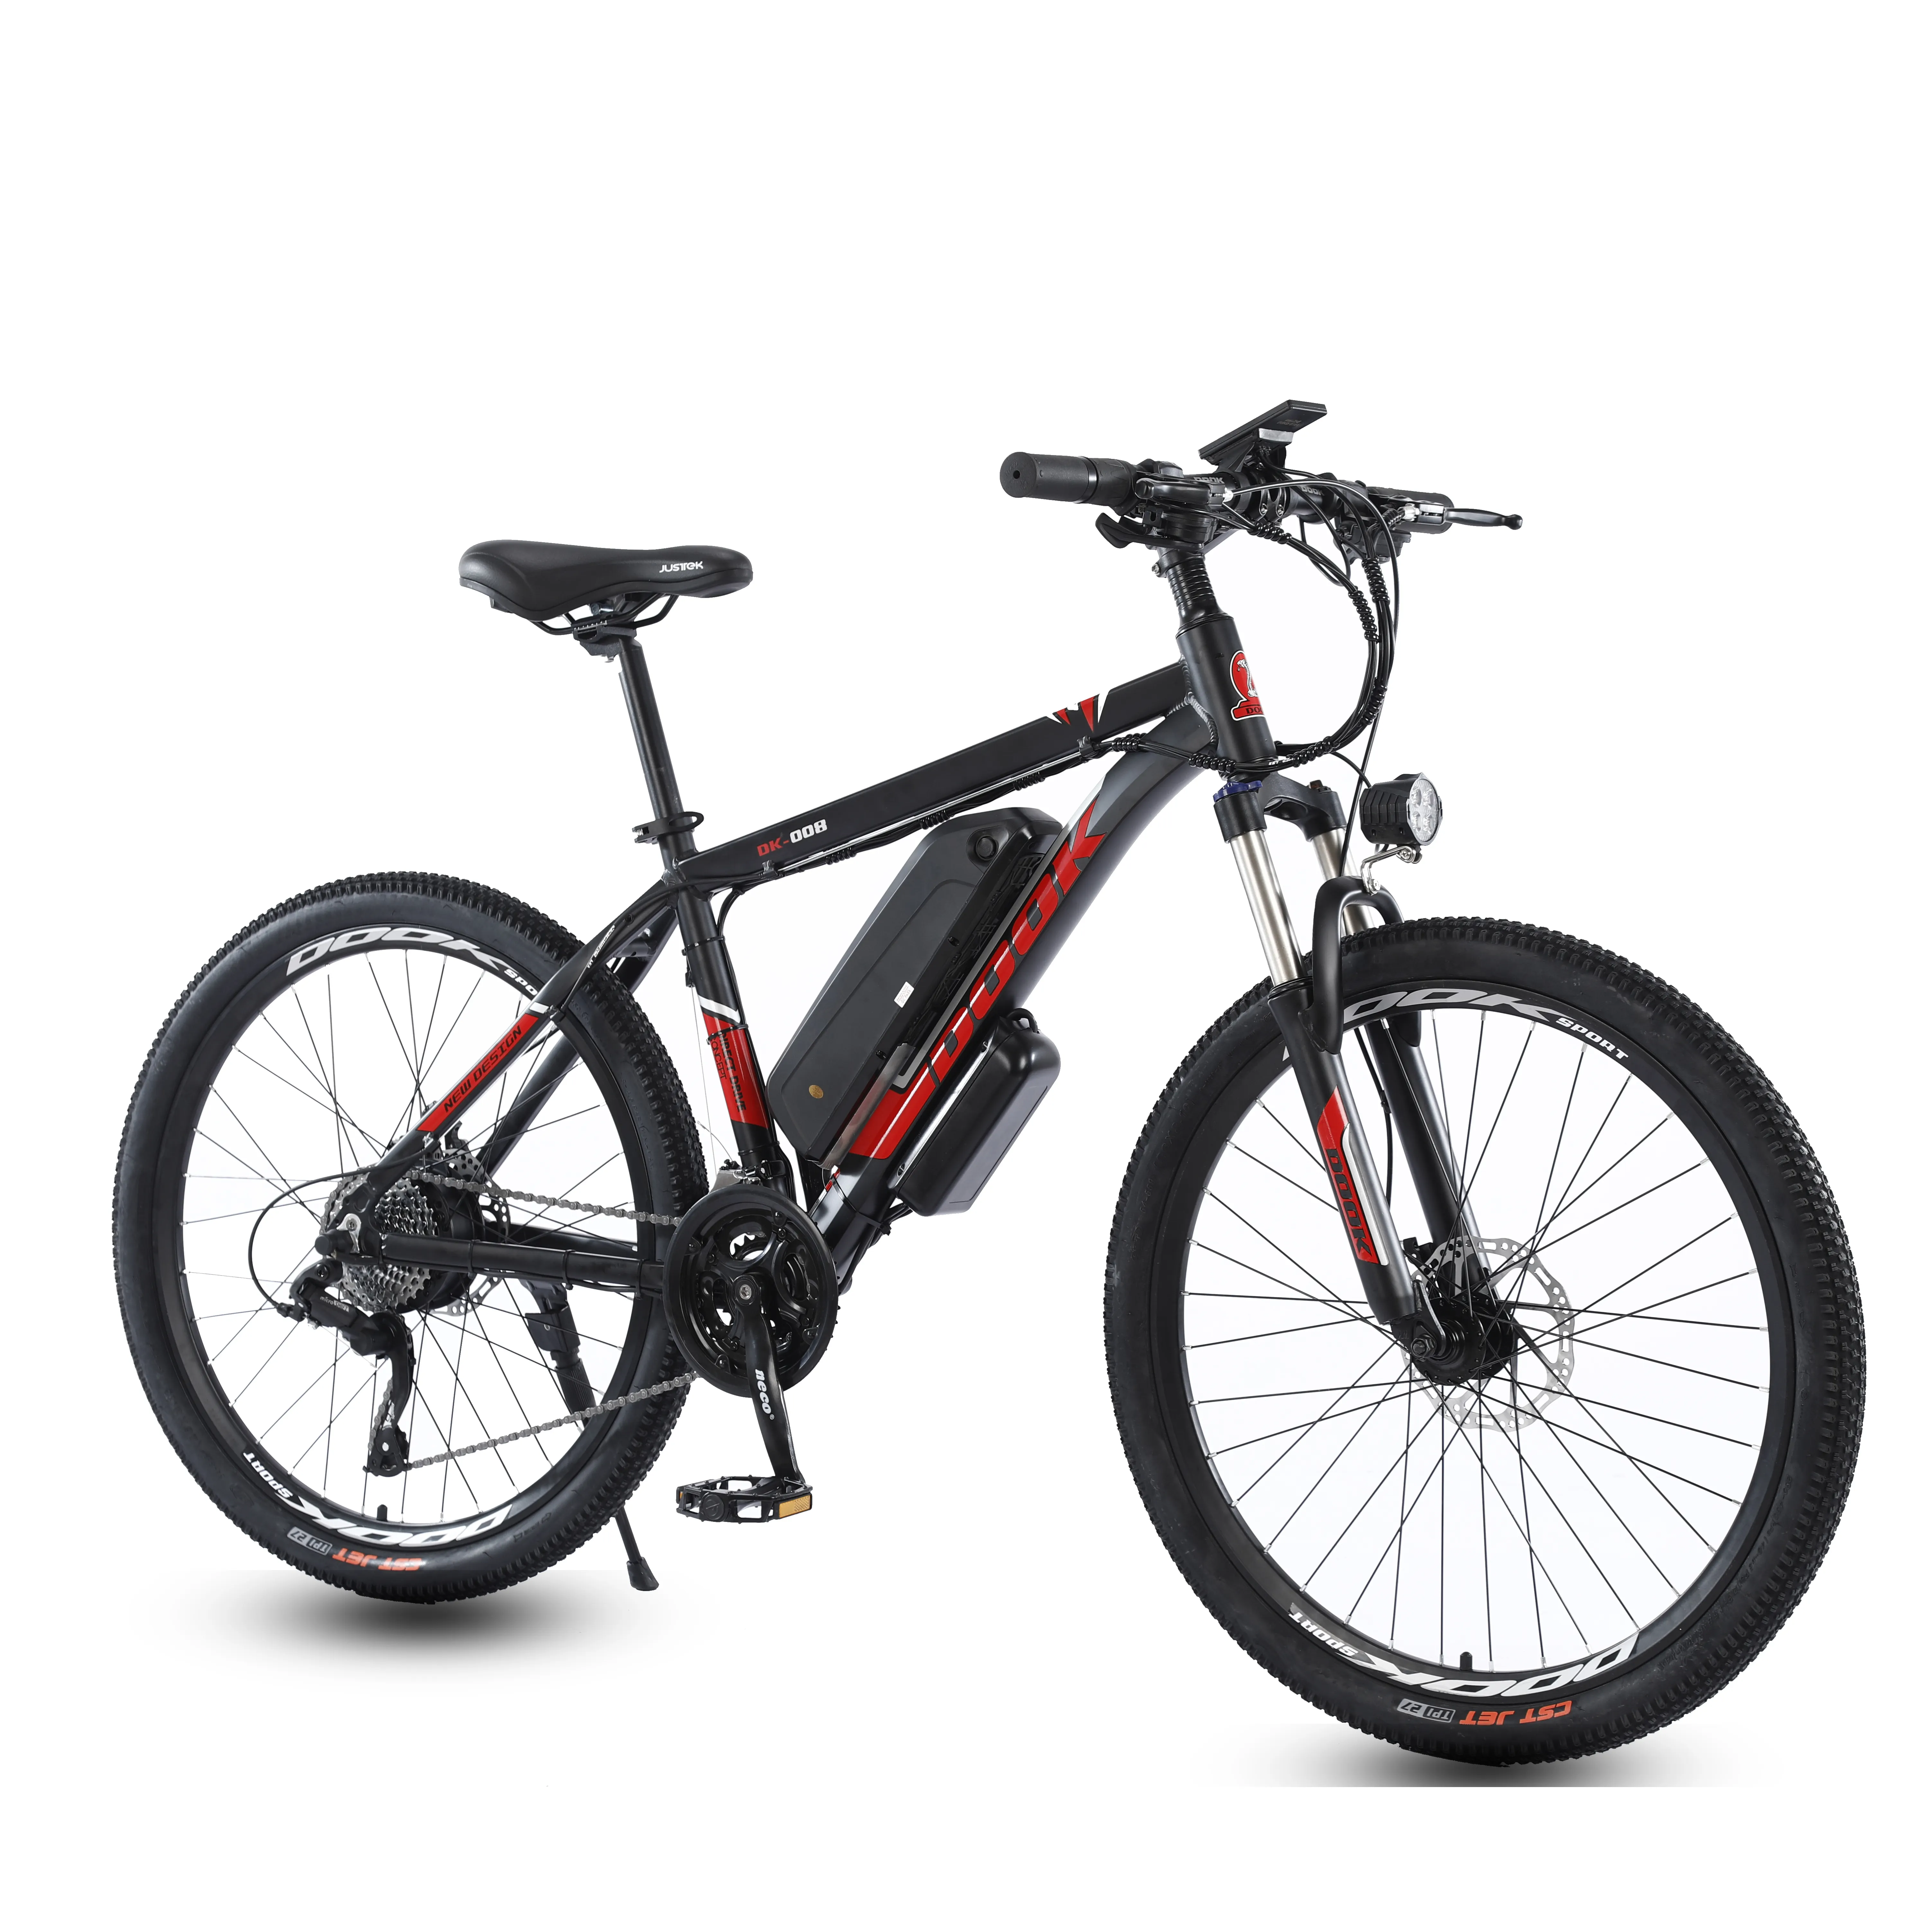 2021 factory directly selling 3000w 5000w 8000w powered electric bike bicycle 26inch fat tire electric bike for sale